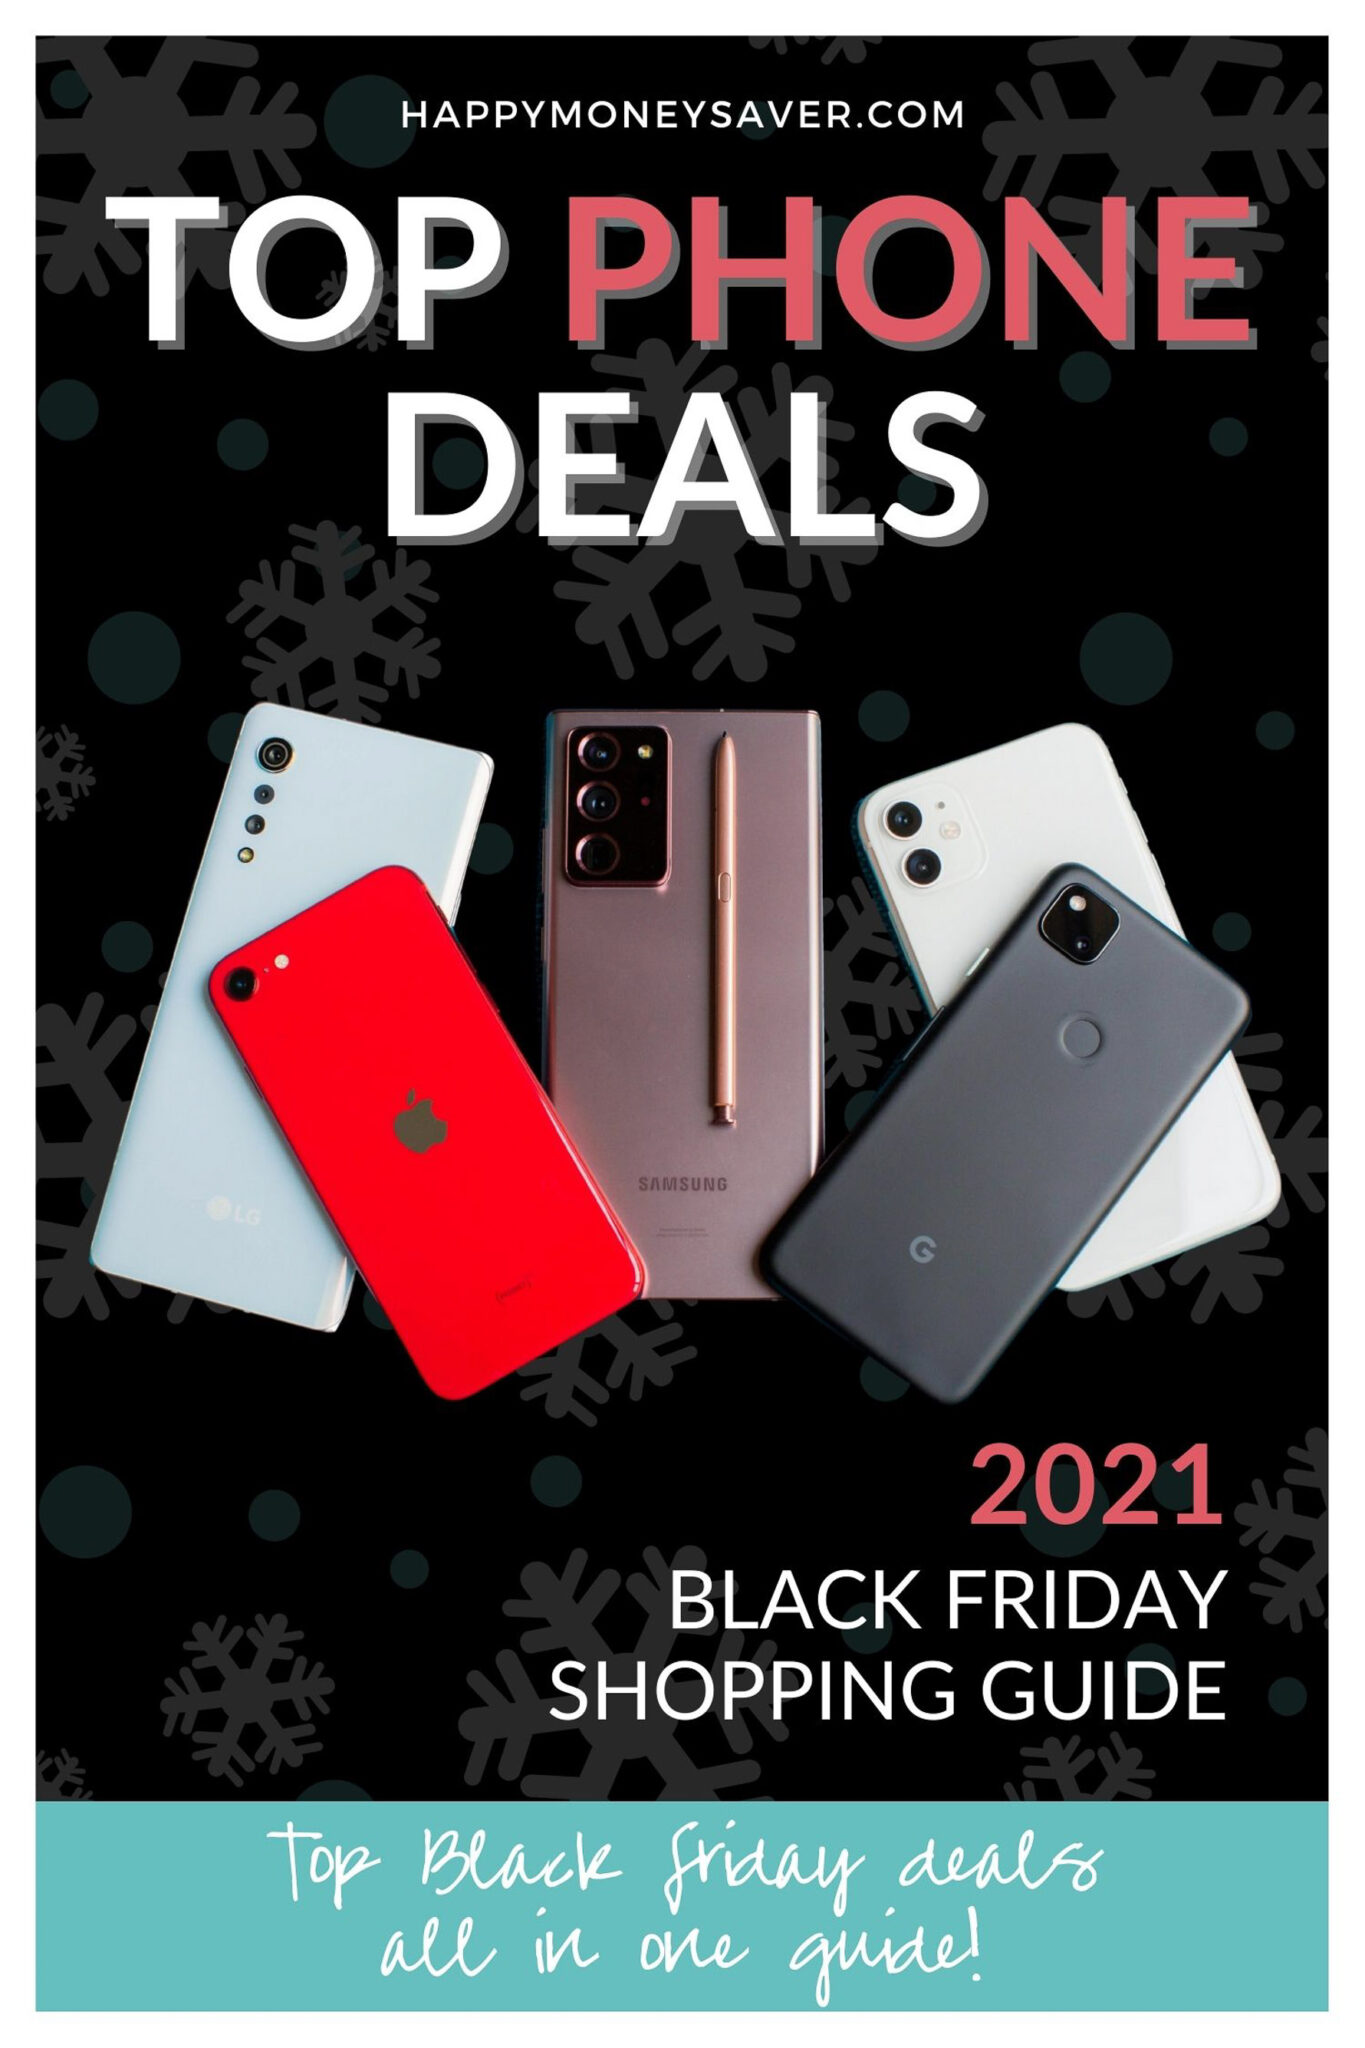 Top Black Friday PHONE Deals for 2021 - Happy Money Saver - Will There Be Black Friday Phone Deals